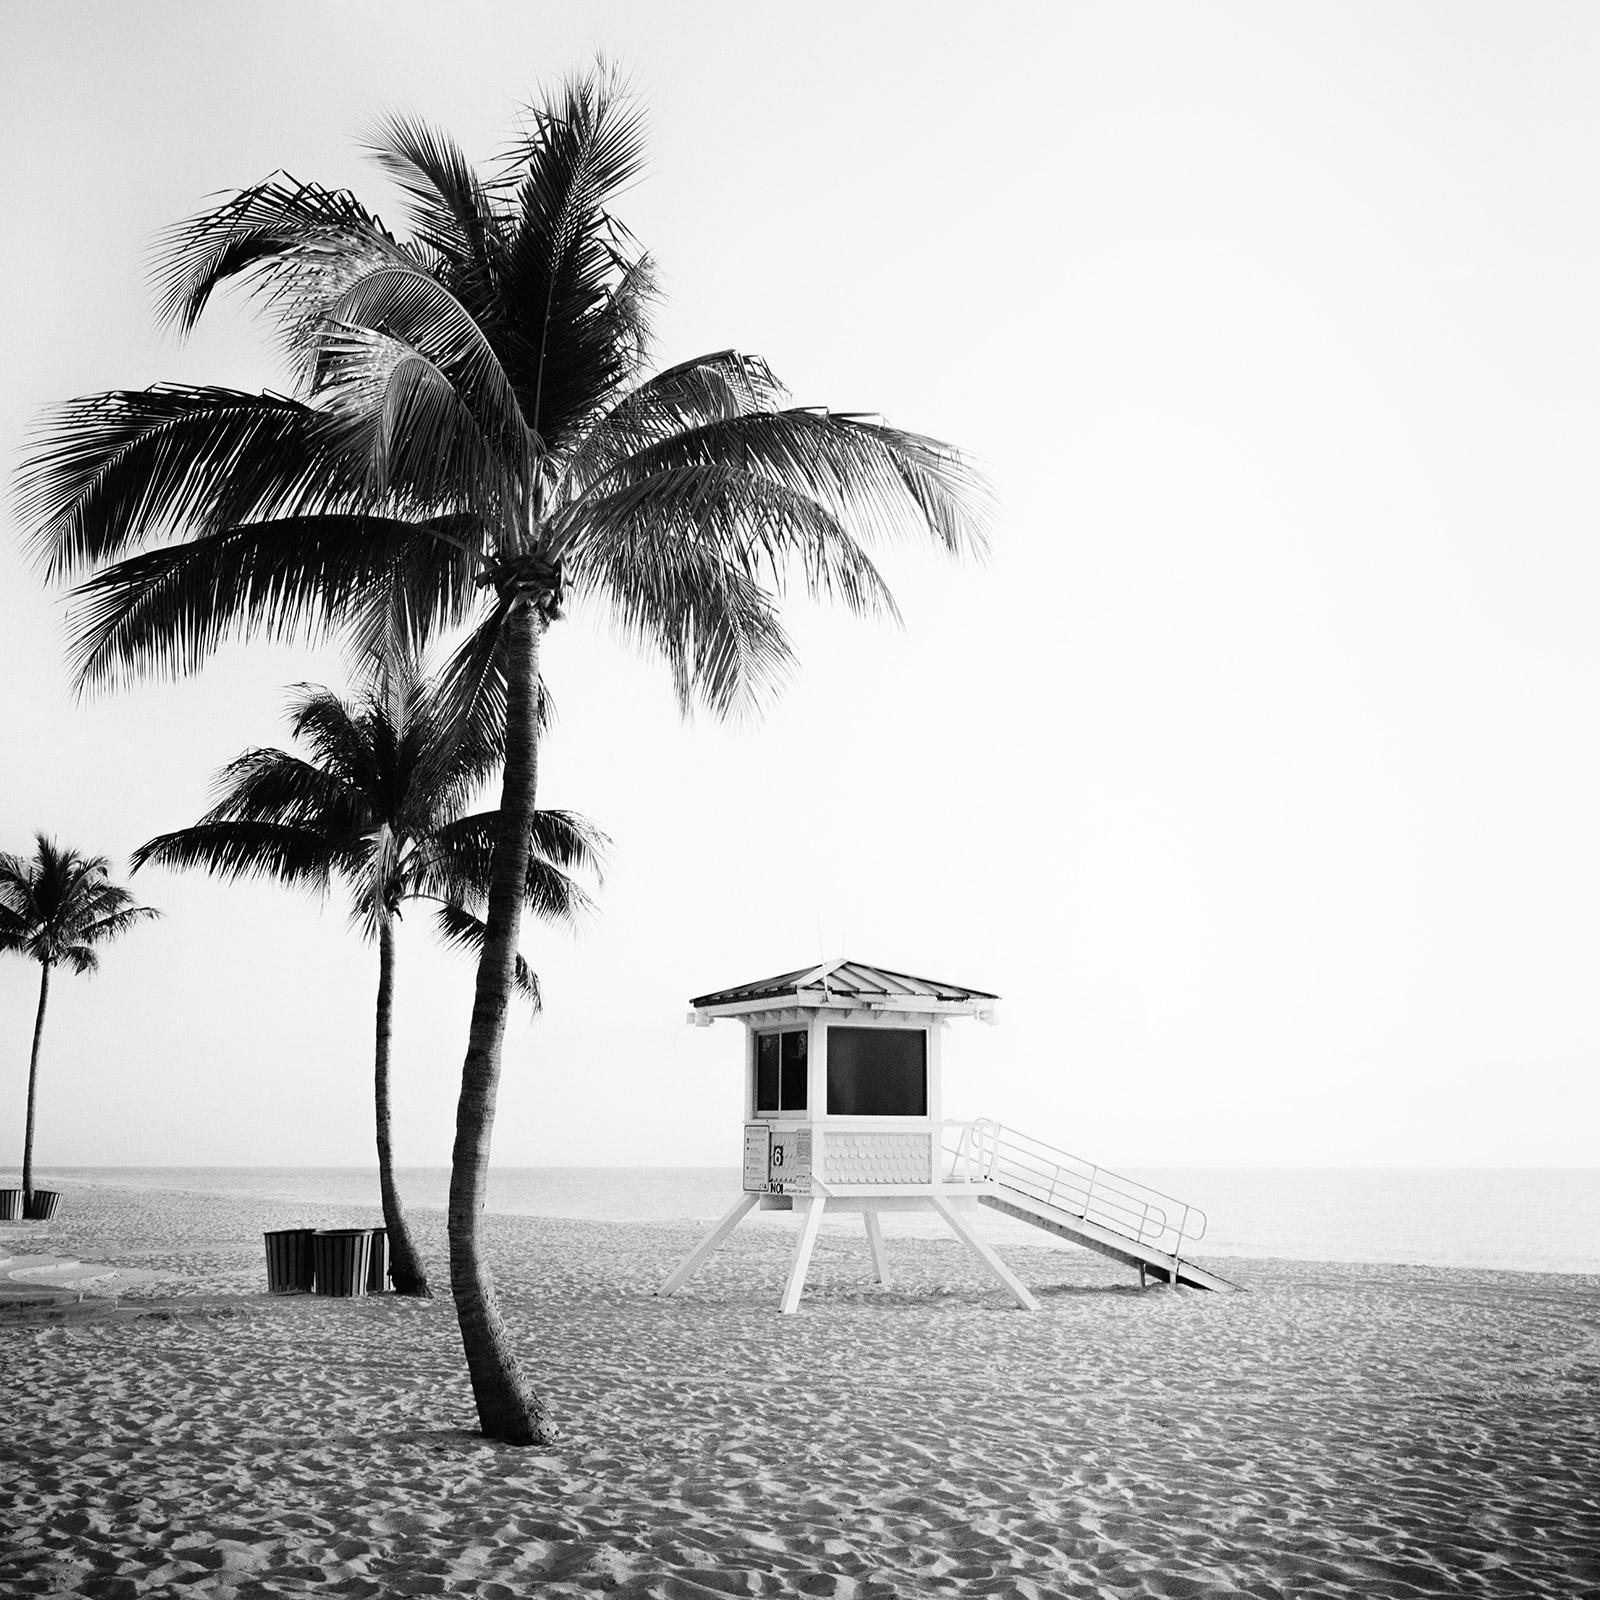 Gerald Berghammer Black and White Photograph - Fort Lauderdale Beach, Florida, USA, black and white art landscape photography